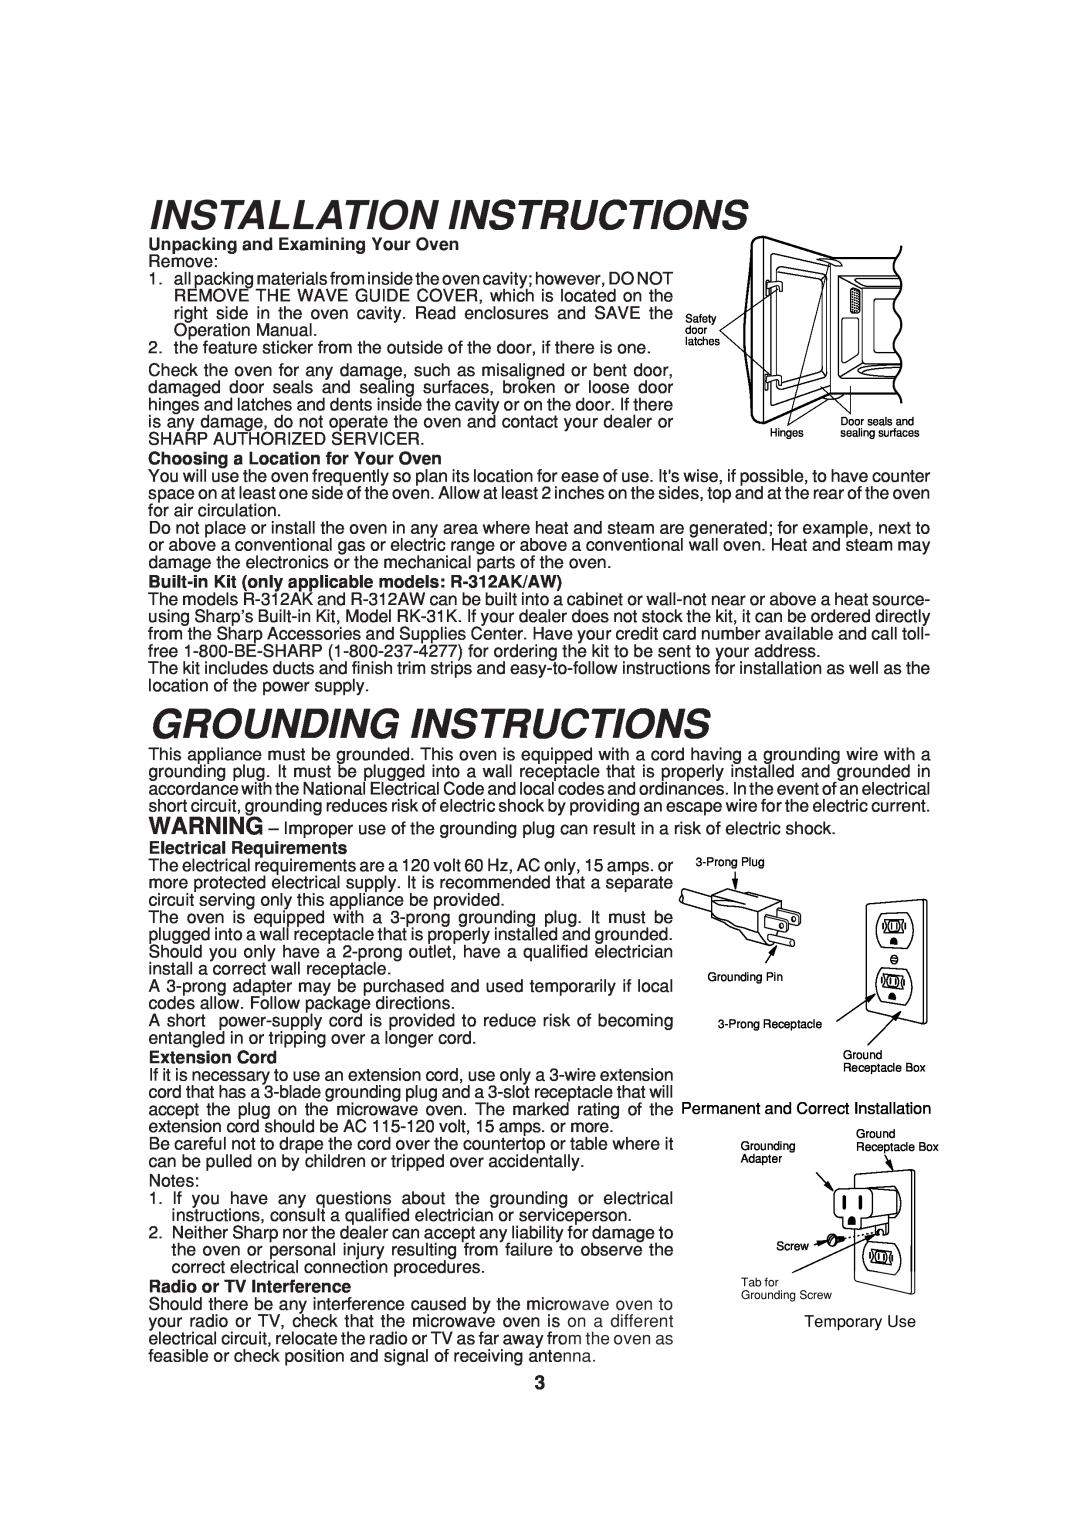 Sharp R-305B Installation Instructions, Grounding Instructions, Unpacking and Examining Your Oven, Electrical Requirements 